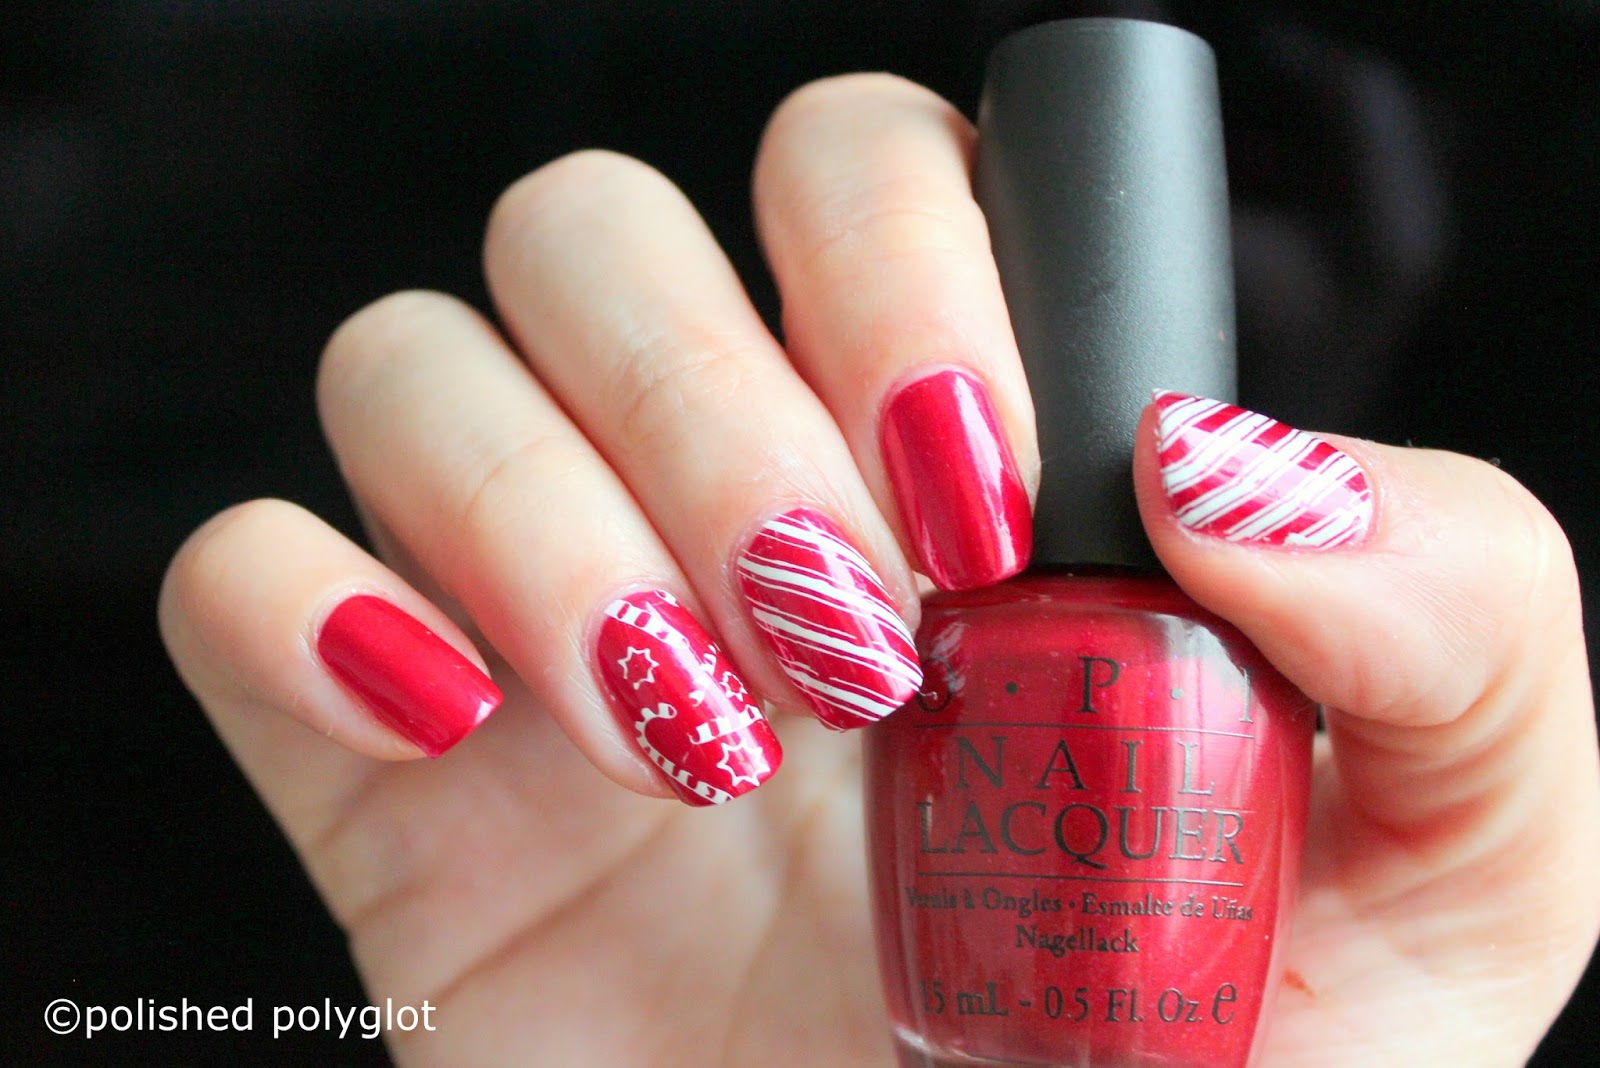 6. Glittery Candy Cane Nails - wide 8